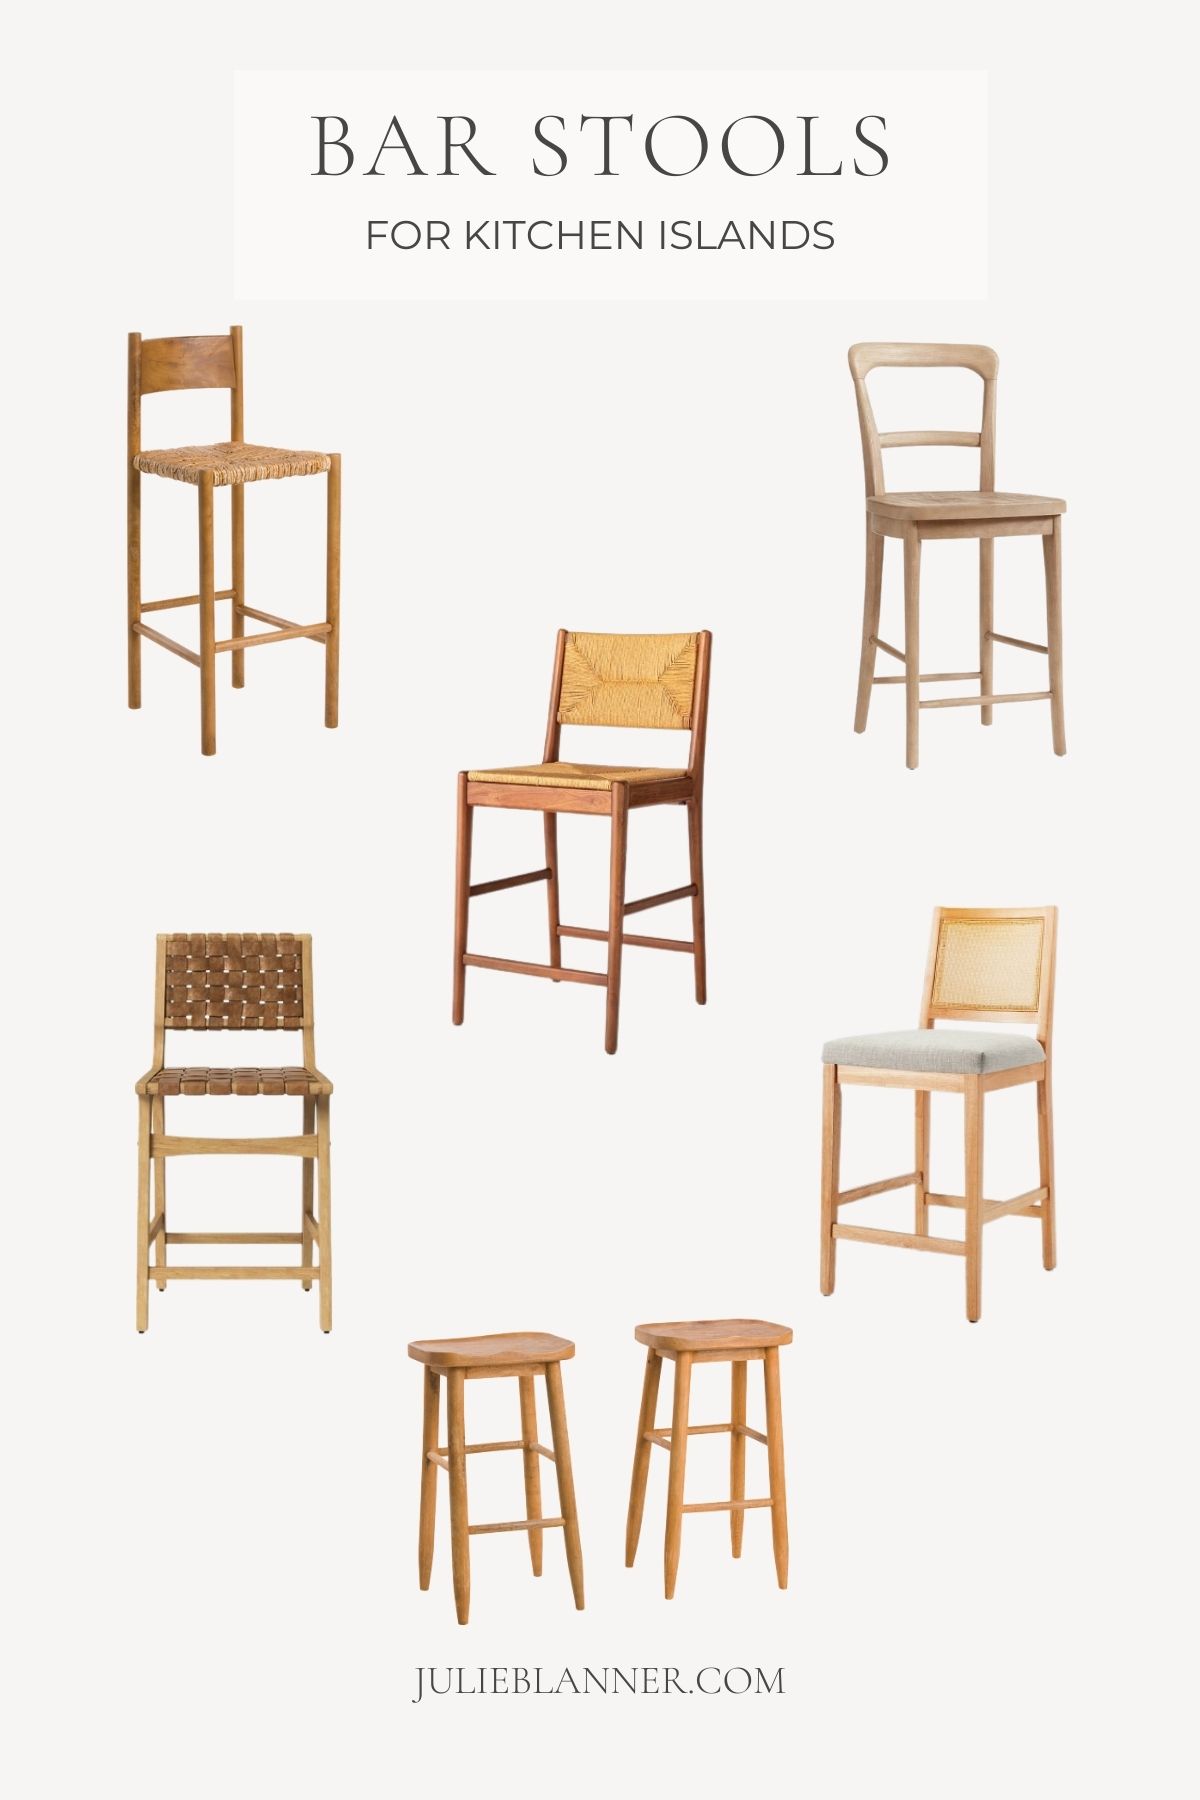 A graphic from julieblanner.com titled "bar stools for kitchen islands" with images of a variety of wooden bar stools